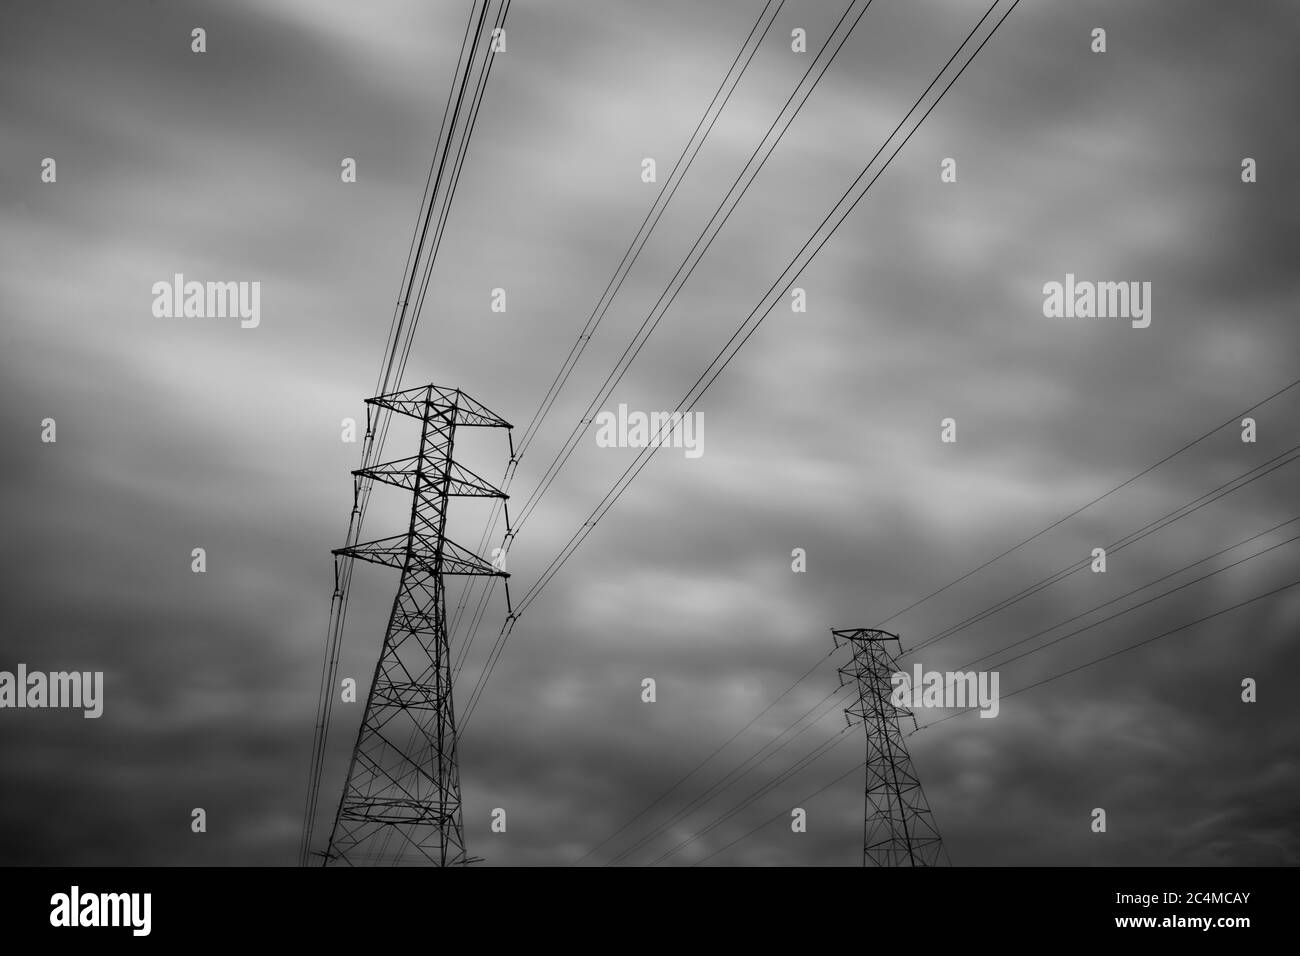 Dramatic Close-up transmission towers (power tower, electricity pylon, steel lattice tower) cloud dark sky in New Zealand. Stock Photo